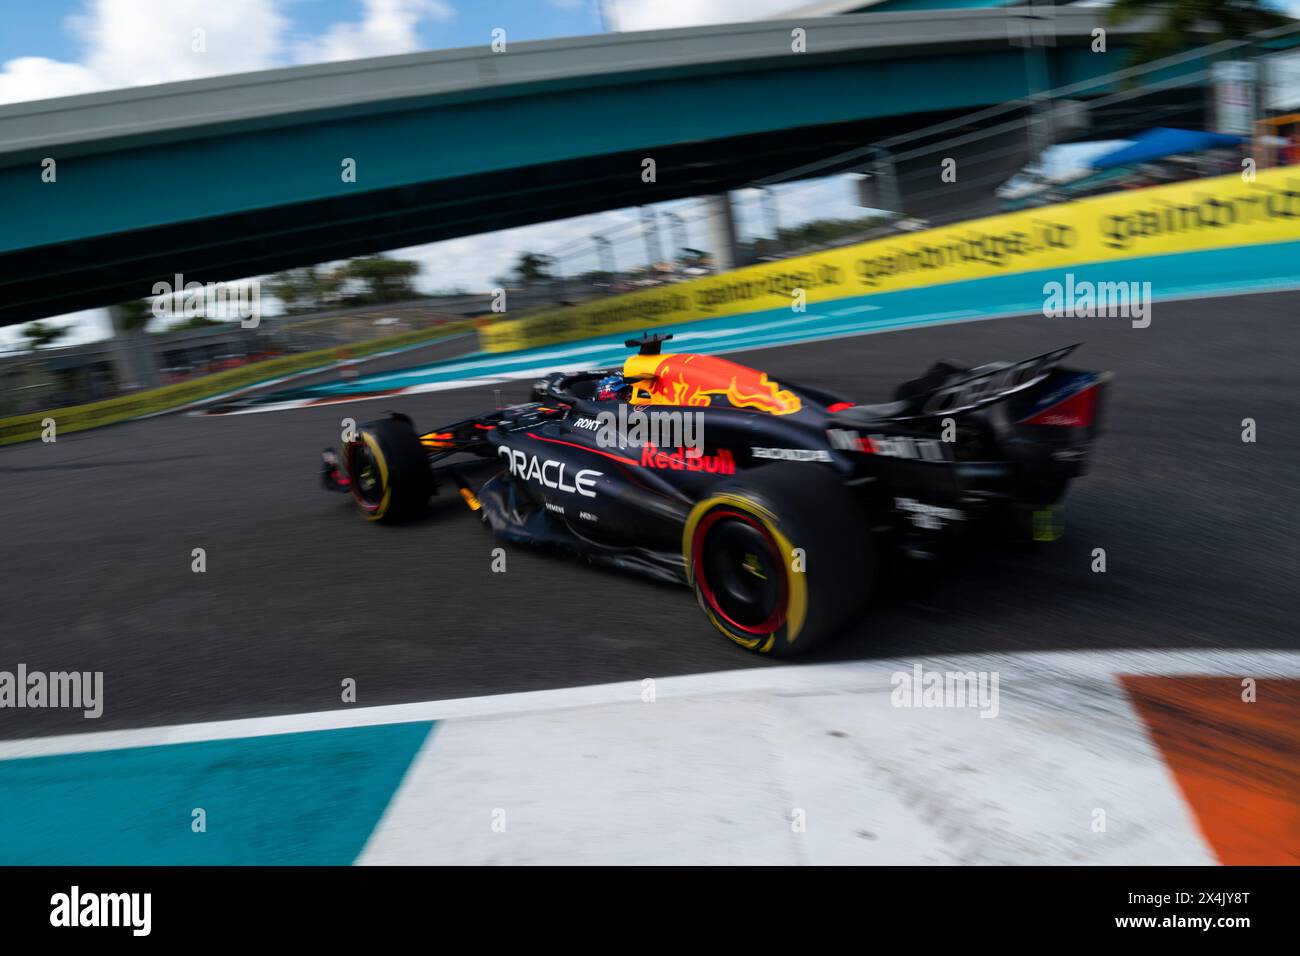 Miami Gardens, United States. 03rd May, 2024. Dutch Formula One driver Max Verstappen of Red Bull Racing participates in sprint qualifying during the Formula One Miami Grand Prix at the Miami International Autodrome in Miami Gardens, Florida on Friday, May 3, 2024 Photo by Greg Nash/UPI. Credit: UPI/Alamy Live News Stock Photo